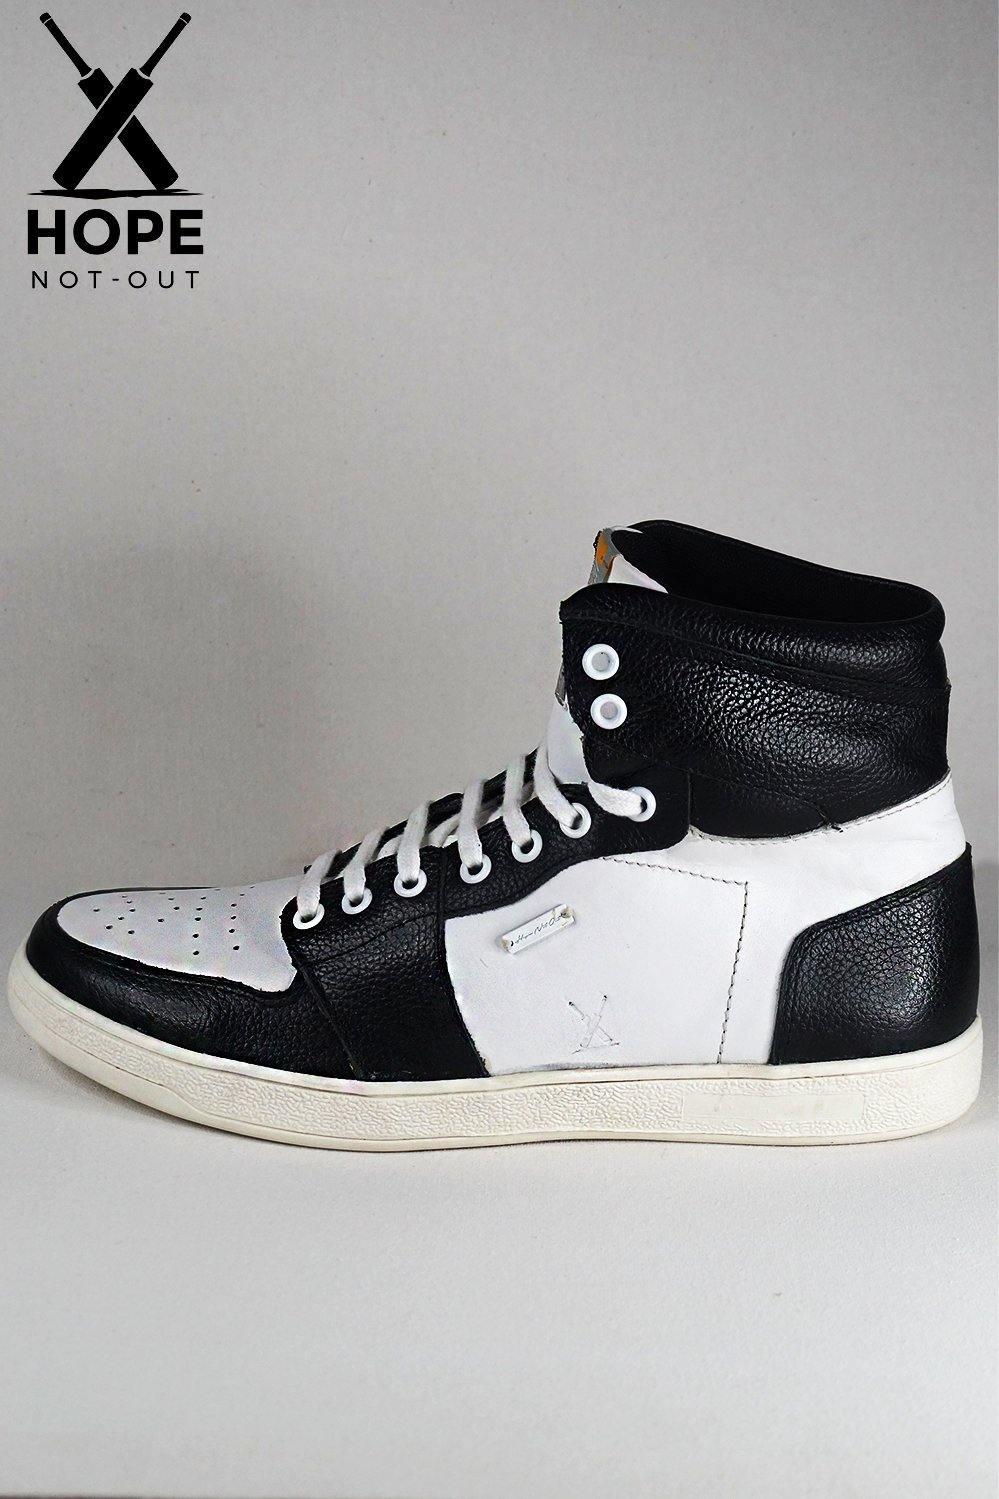 Hand Made Leather BLACK/WHITE Shoes HMSLF20009 - Shoes - HOPE NOT OUT